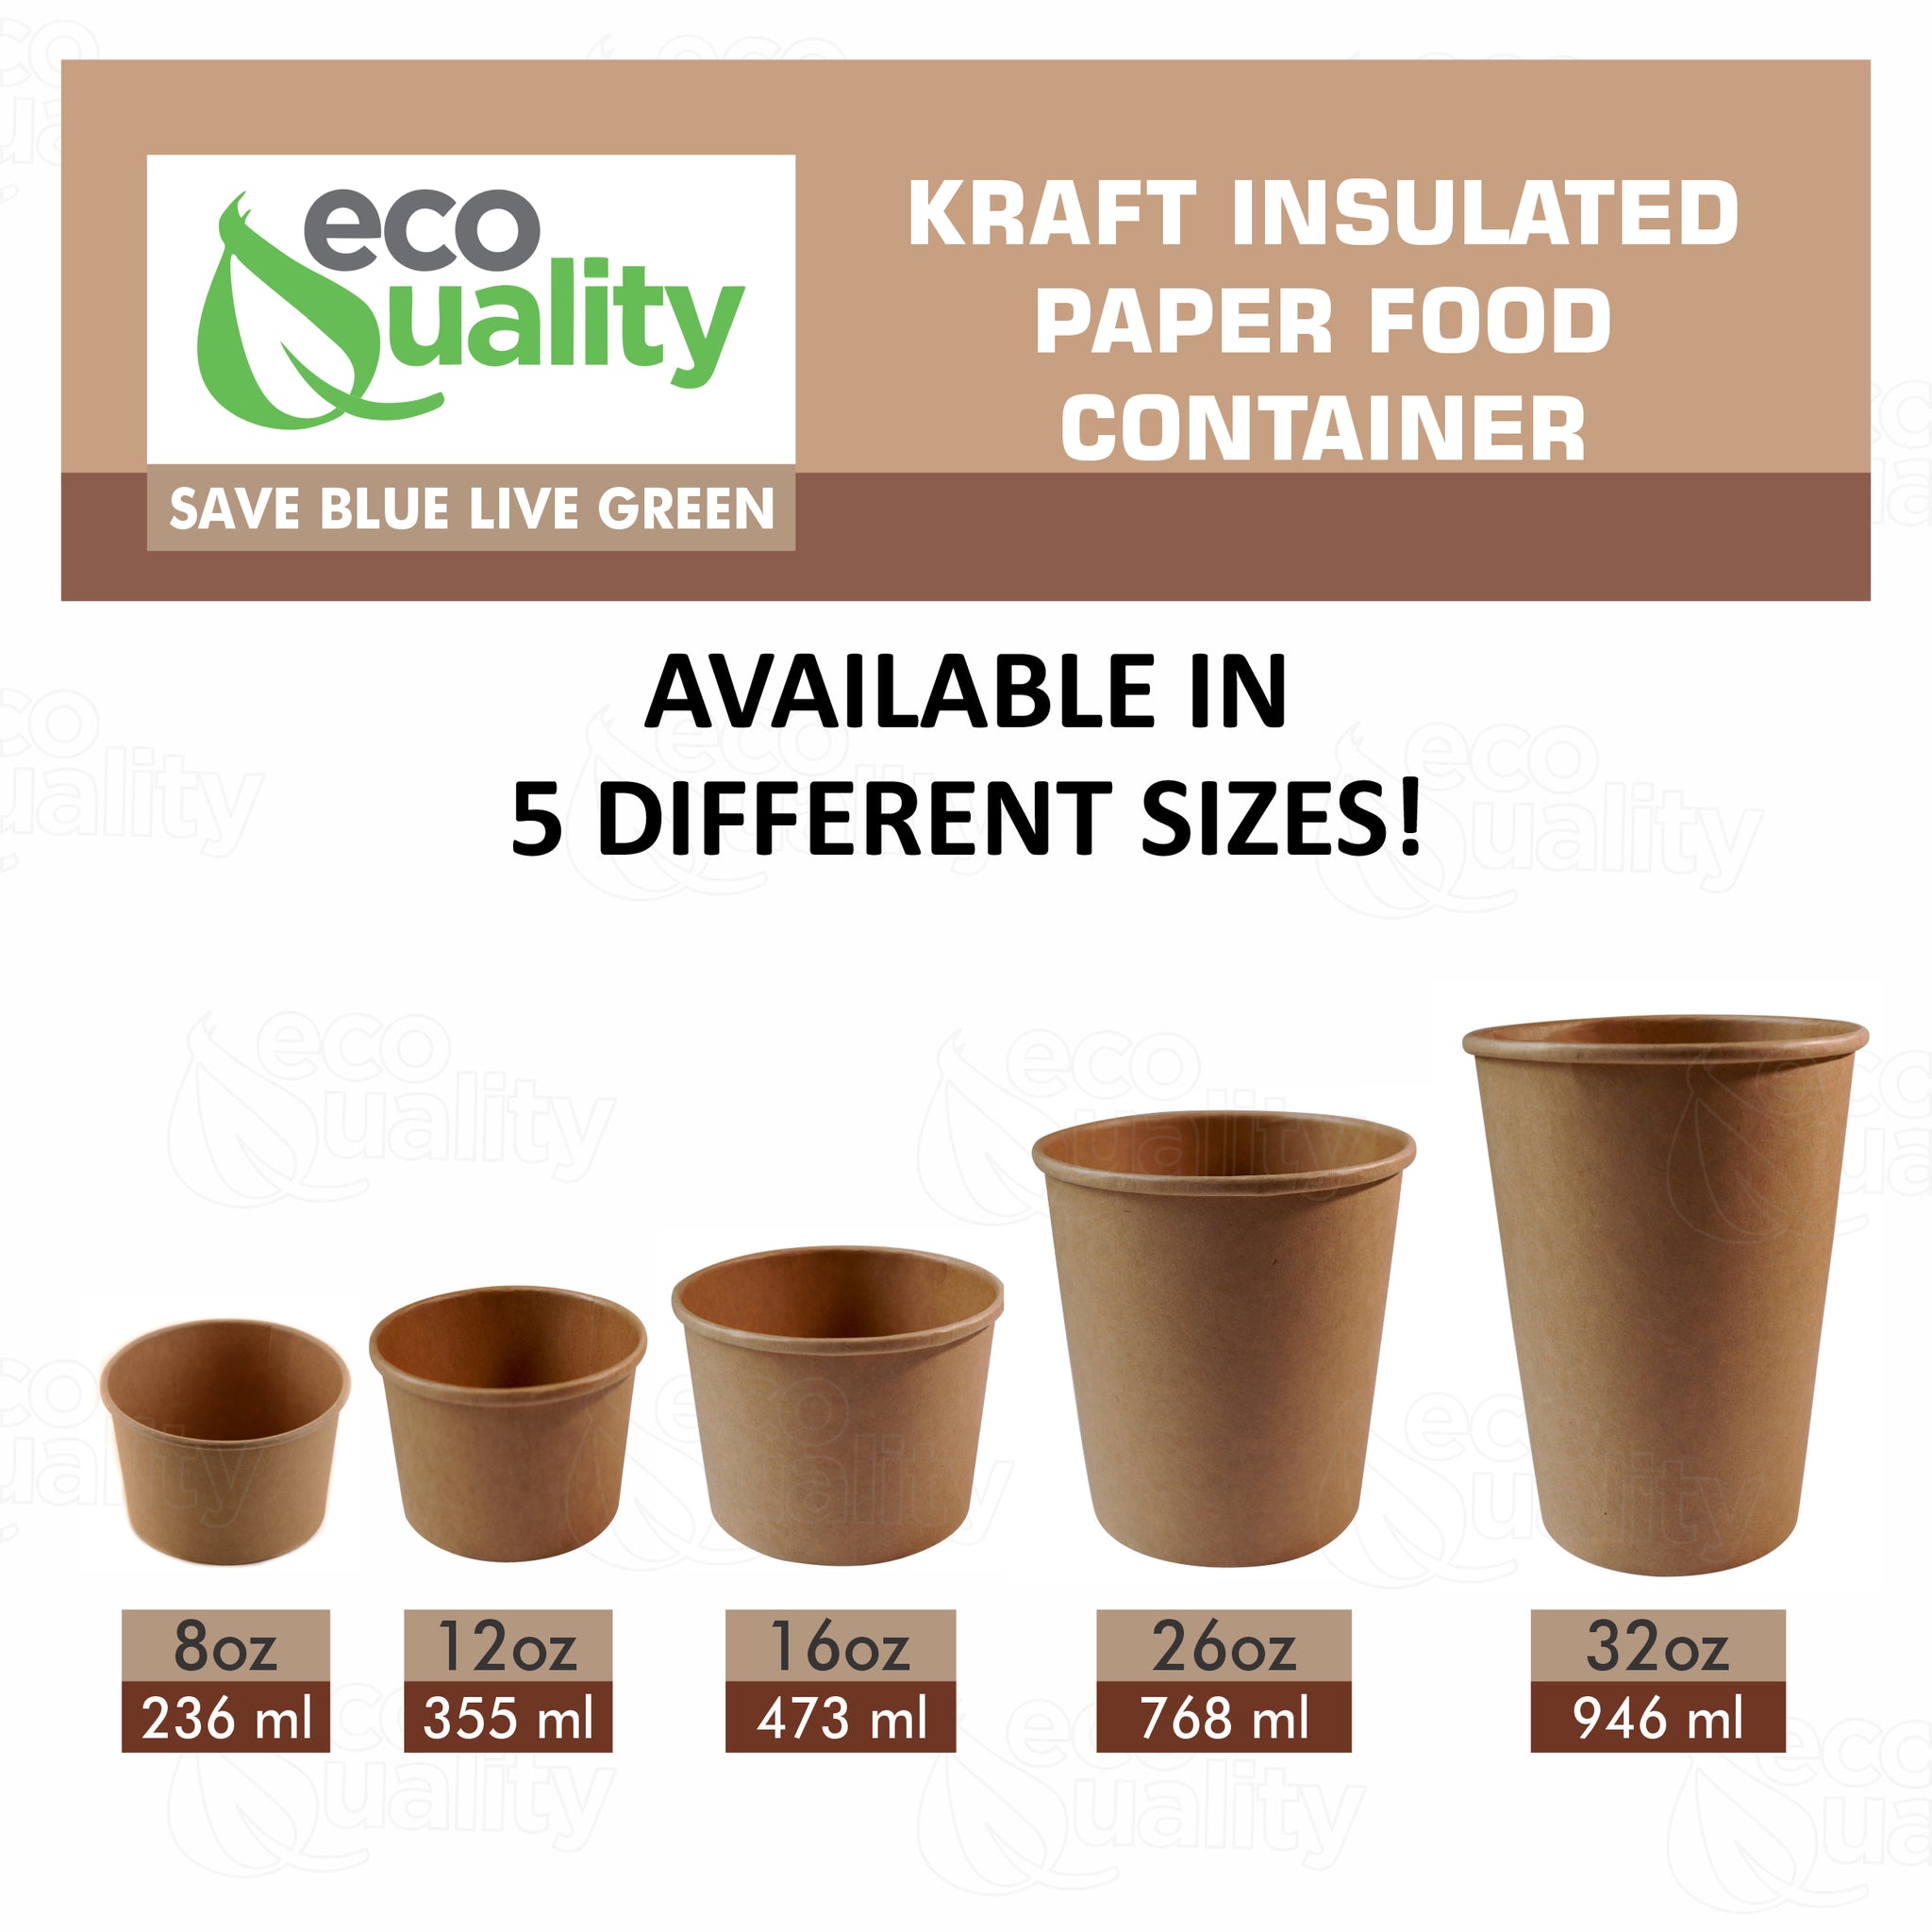 Ice cream soup yogurt cups Take out food container Nyc  Restaurant cafe shop office home disposable catering supplies kraft Paper heavy duty strong sturdy leak free proof   bulk economical wholesale ecoquality Ecofriendly compostable biodegradable  8oz 8 ounces